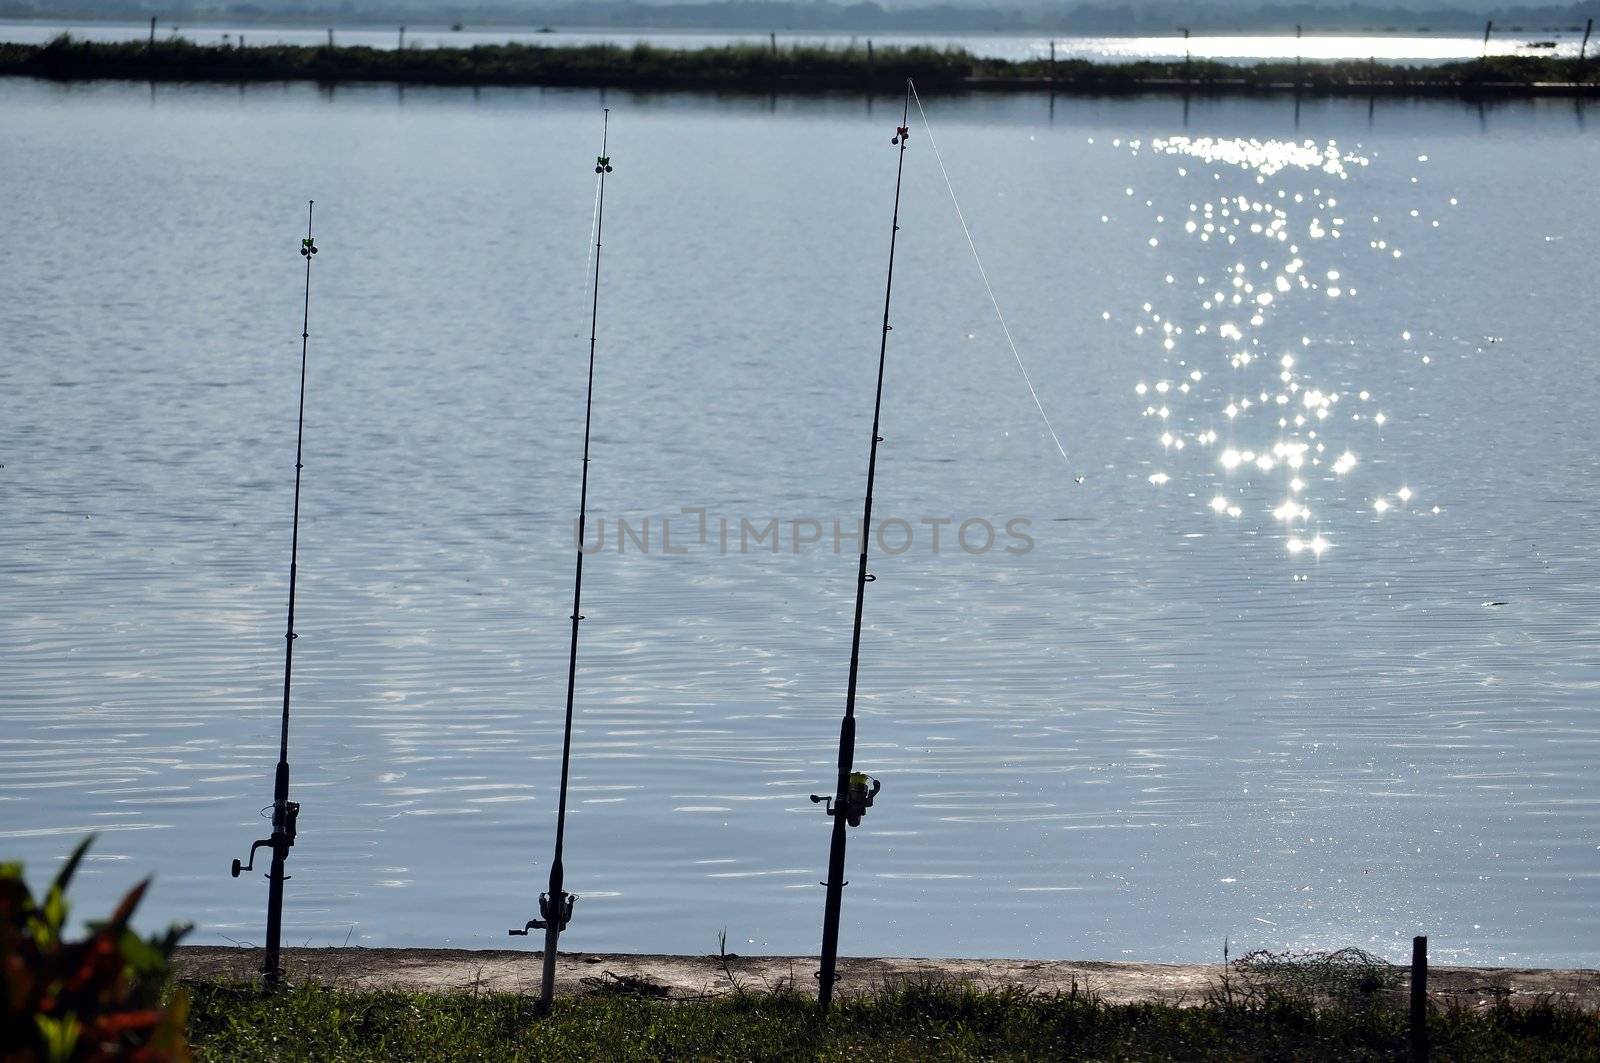 fishing is an activity in holiday 